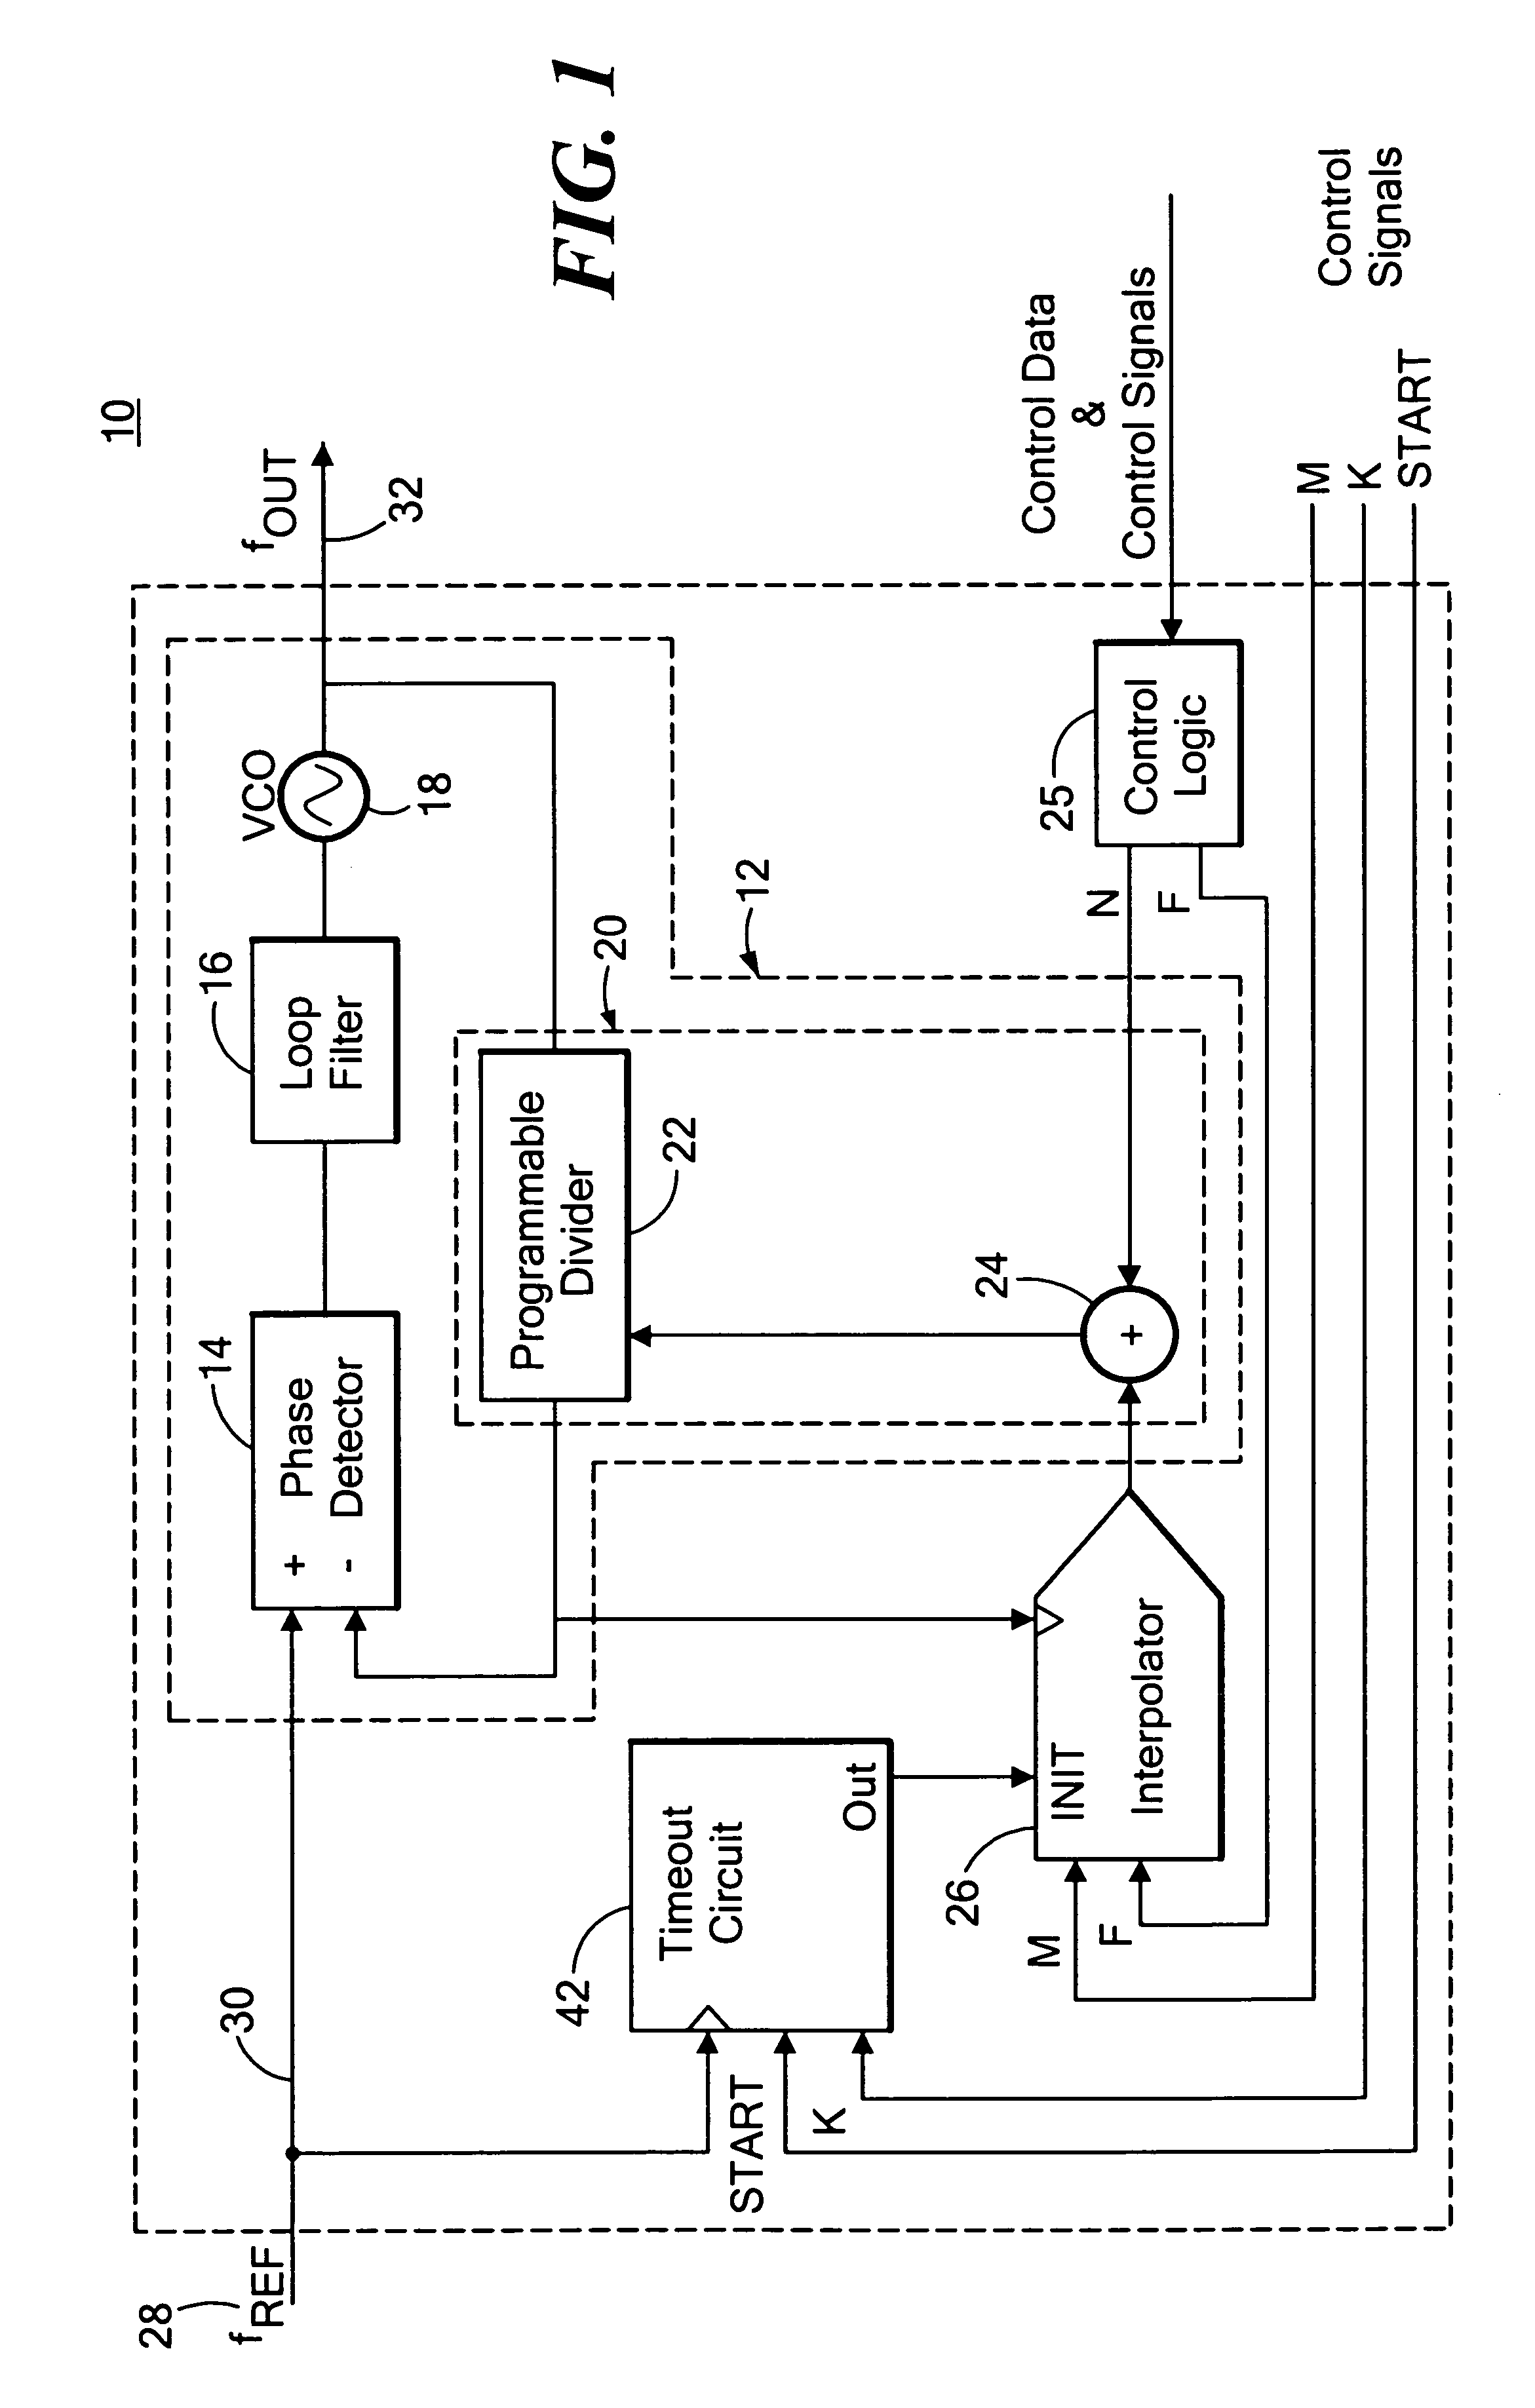 Fractional-N synthesizer system and method